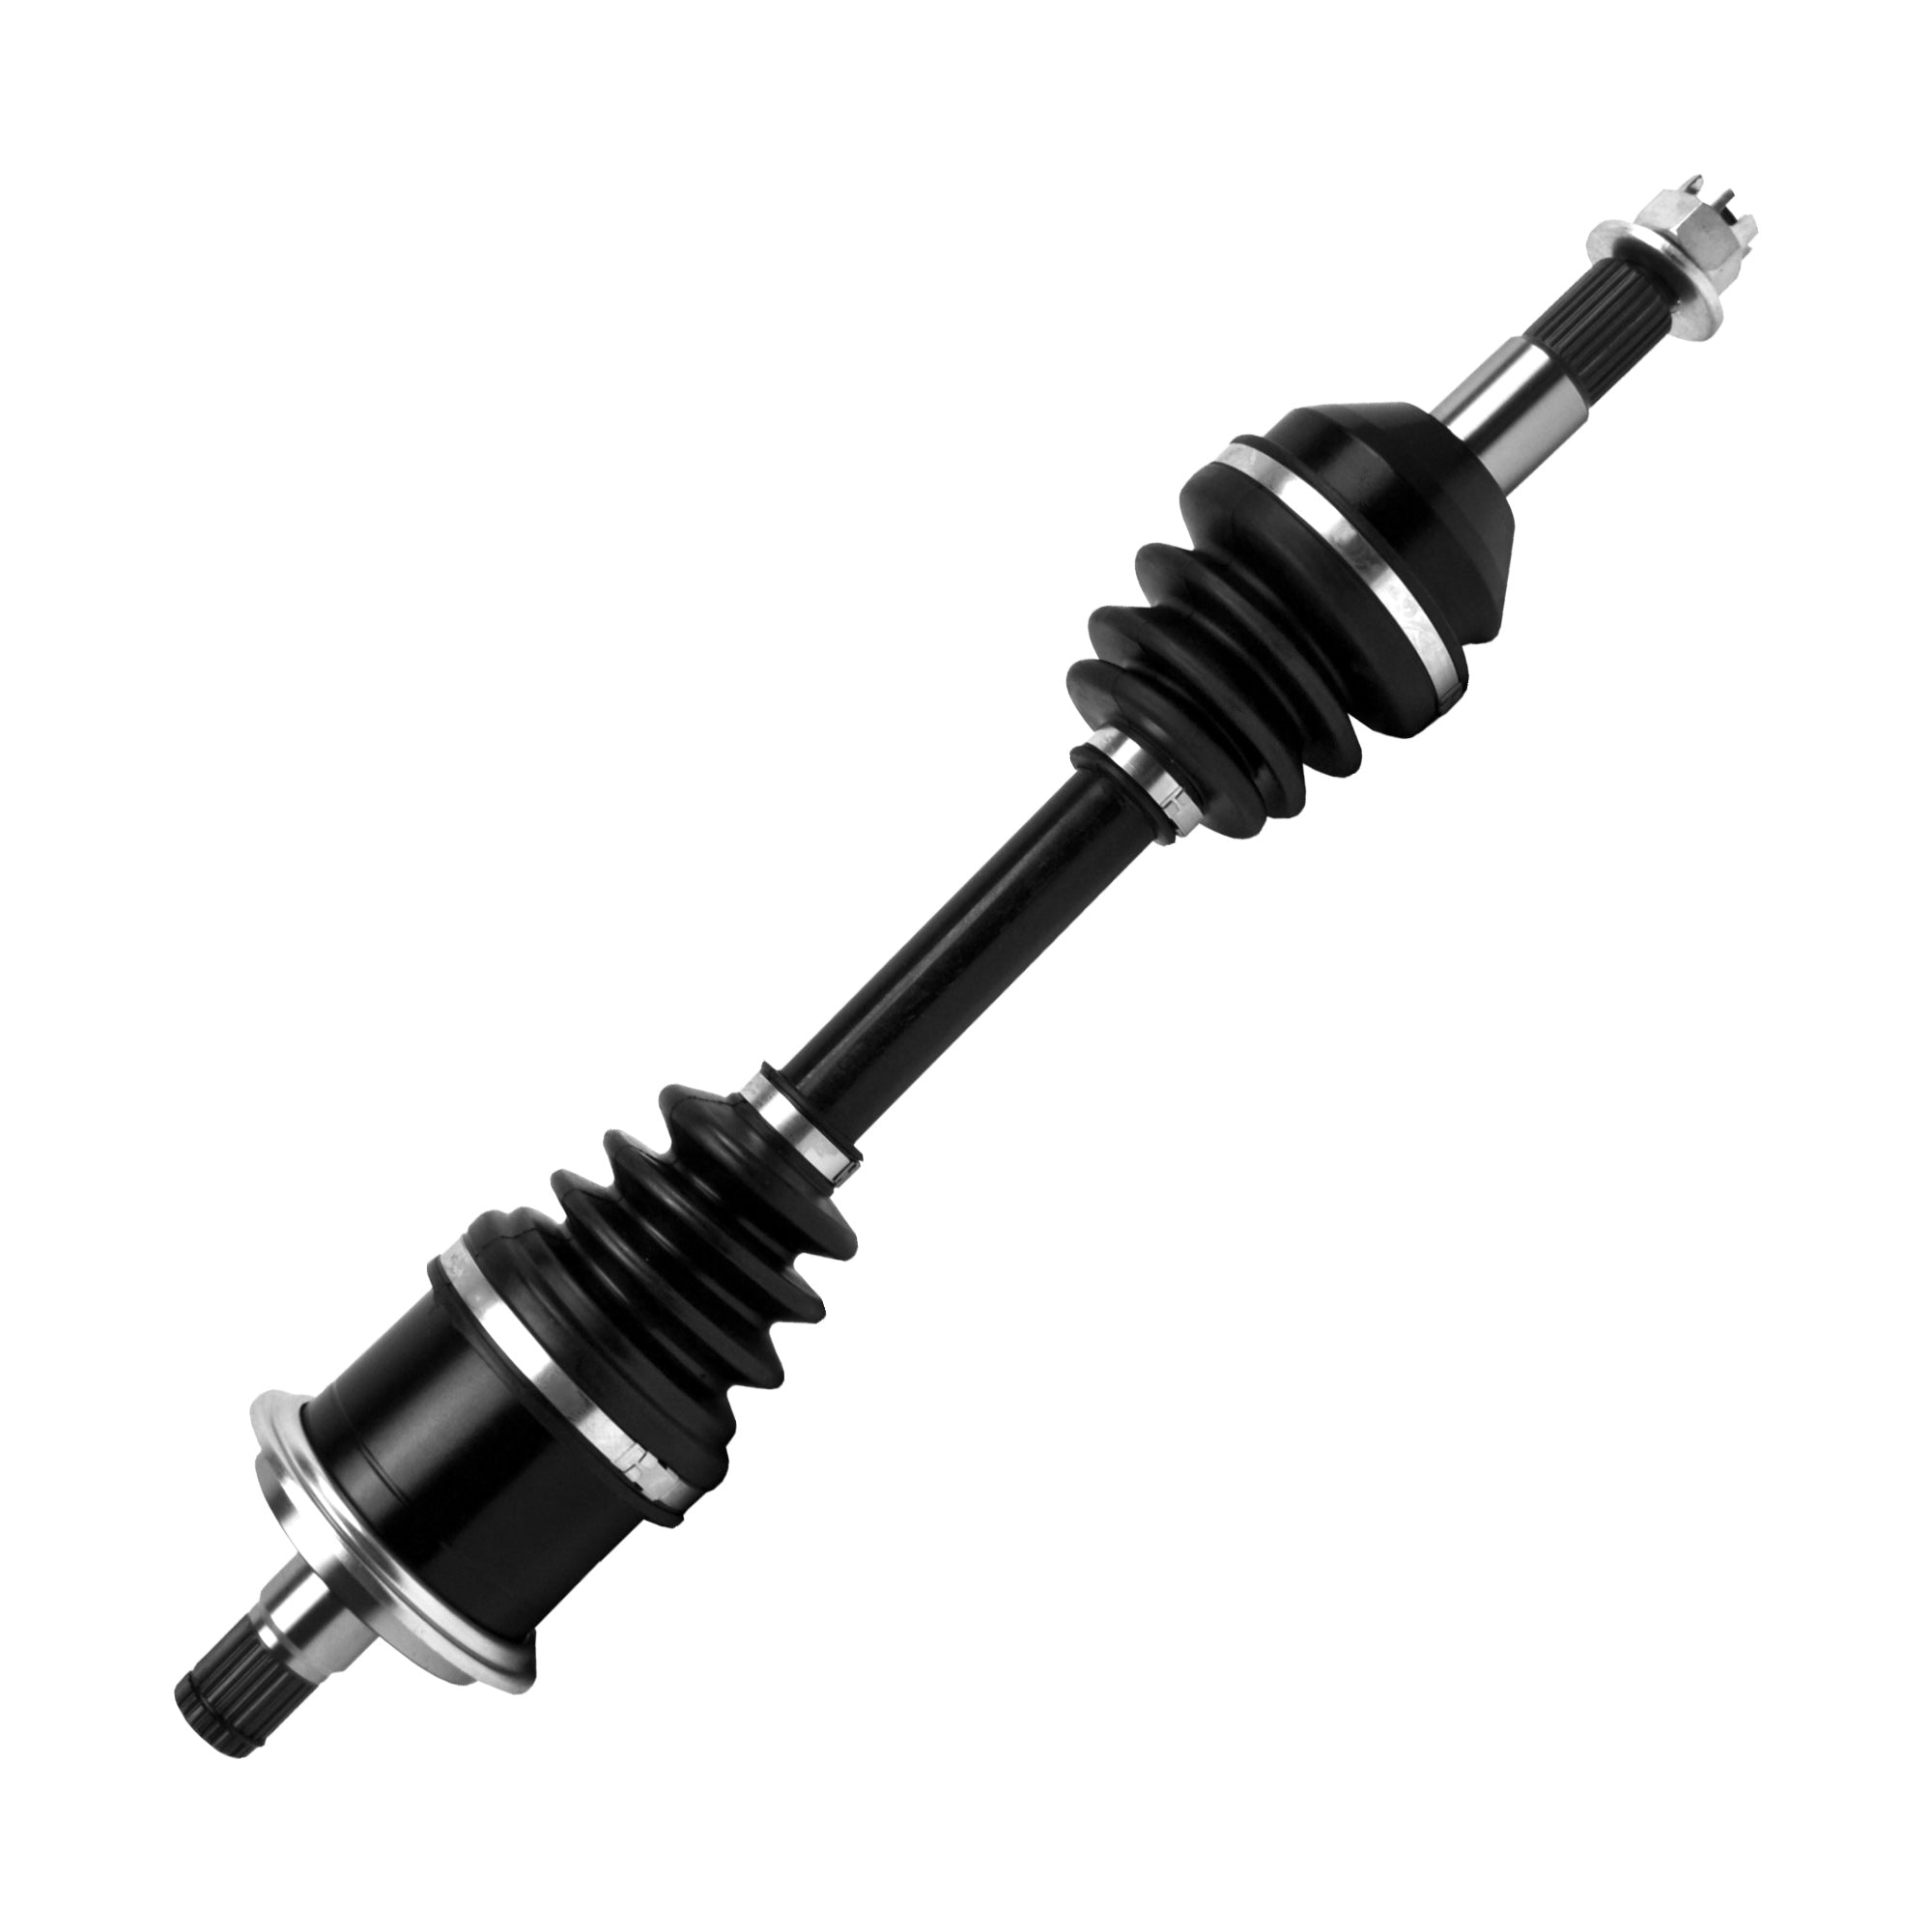 Performance Axle for Can Am Outlander 500 Max 